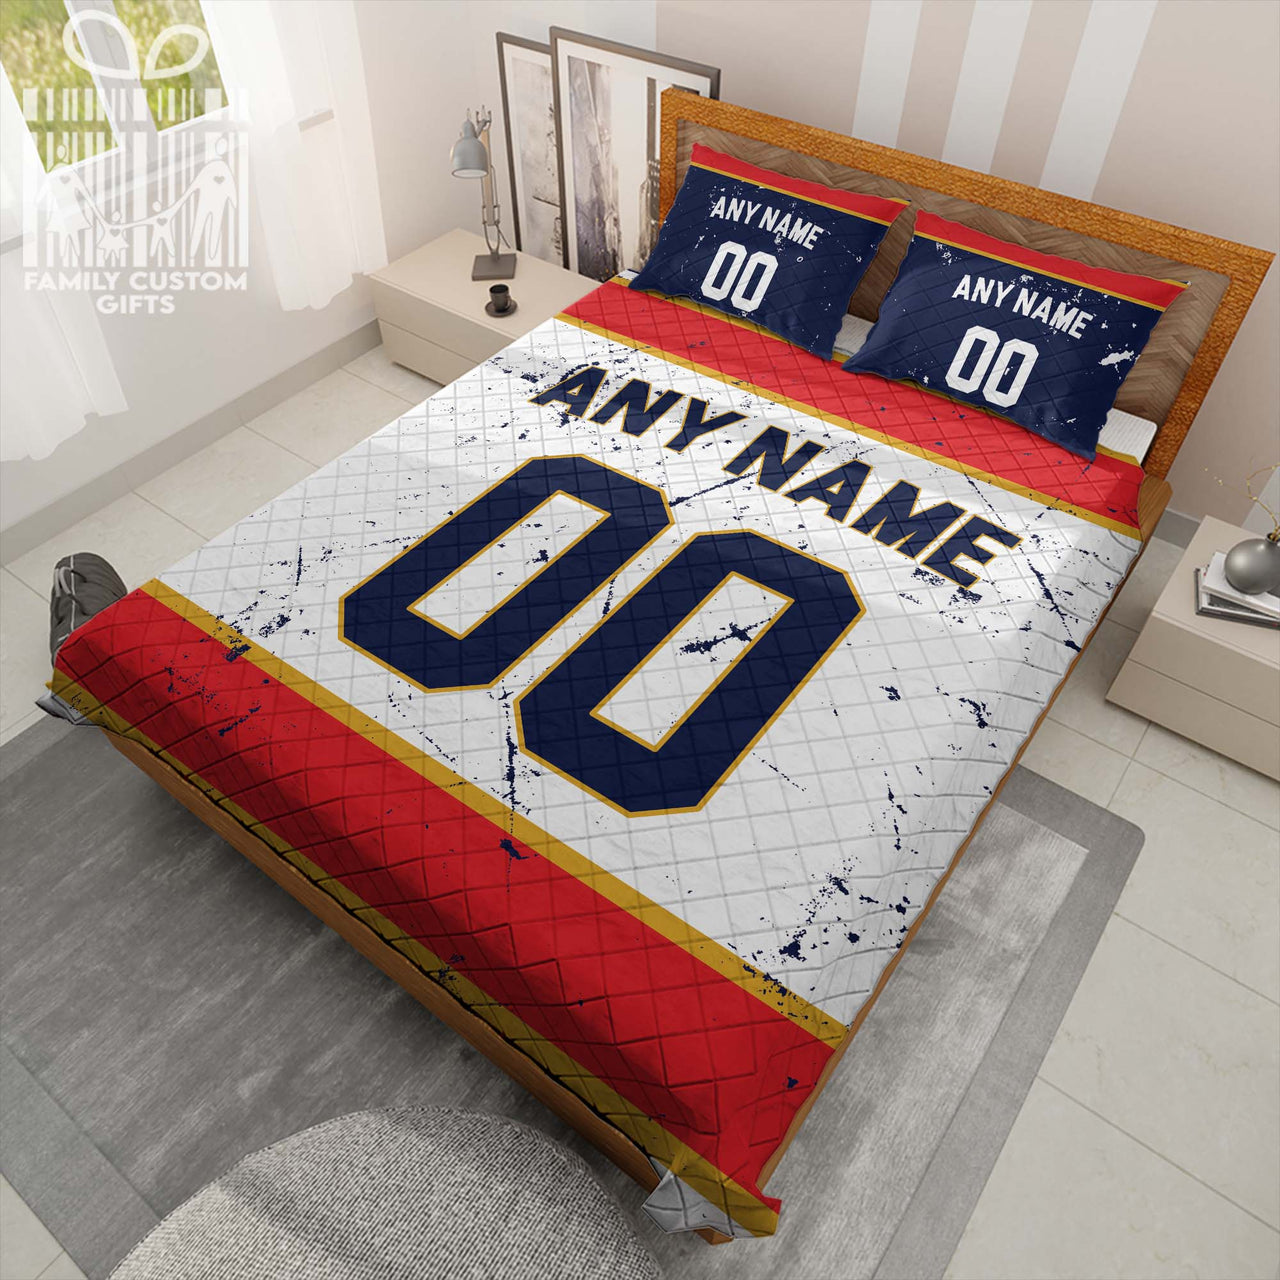 Custom Quilt Sets Florida Jersey Personalized Ice hockey Premium Quilt Bedding for Men Women